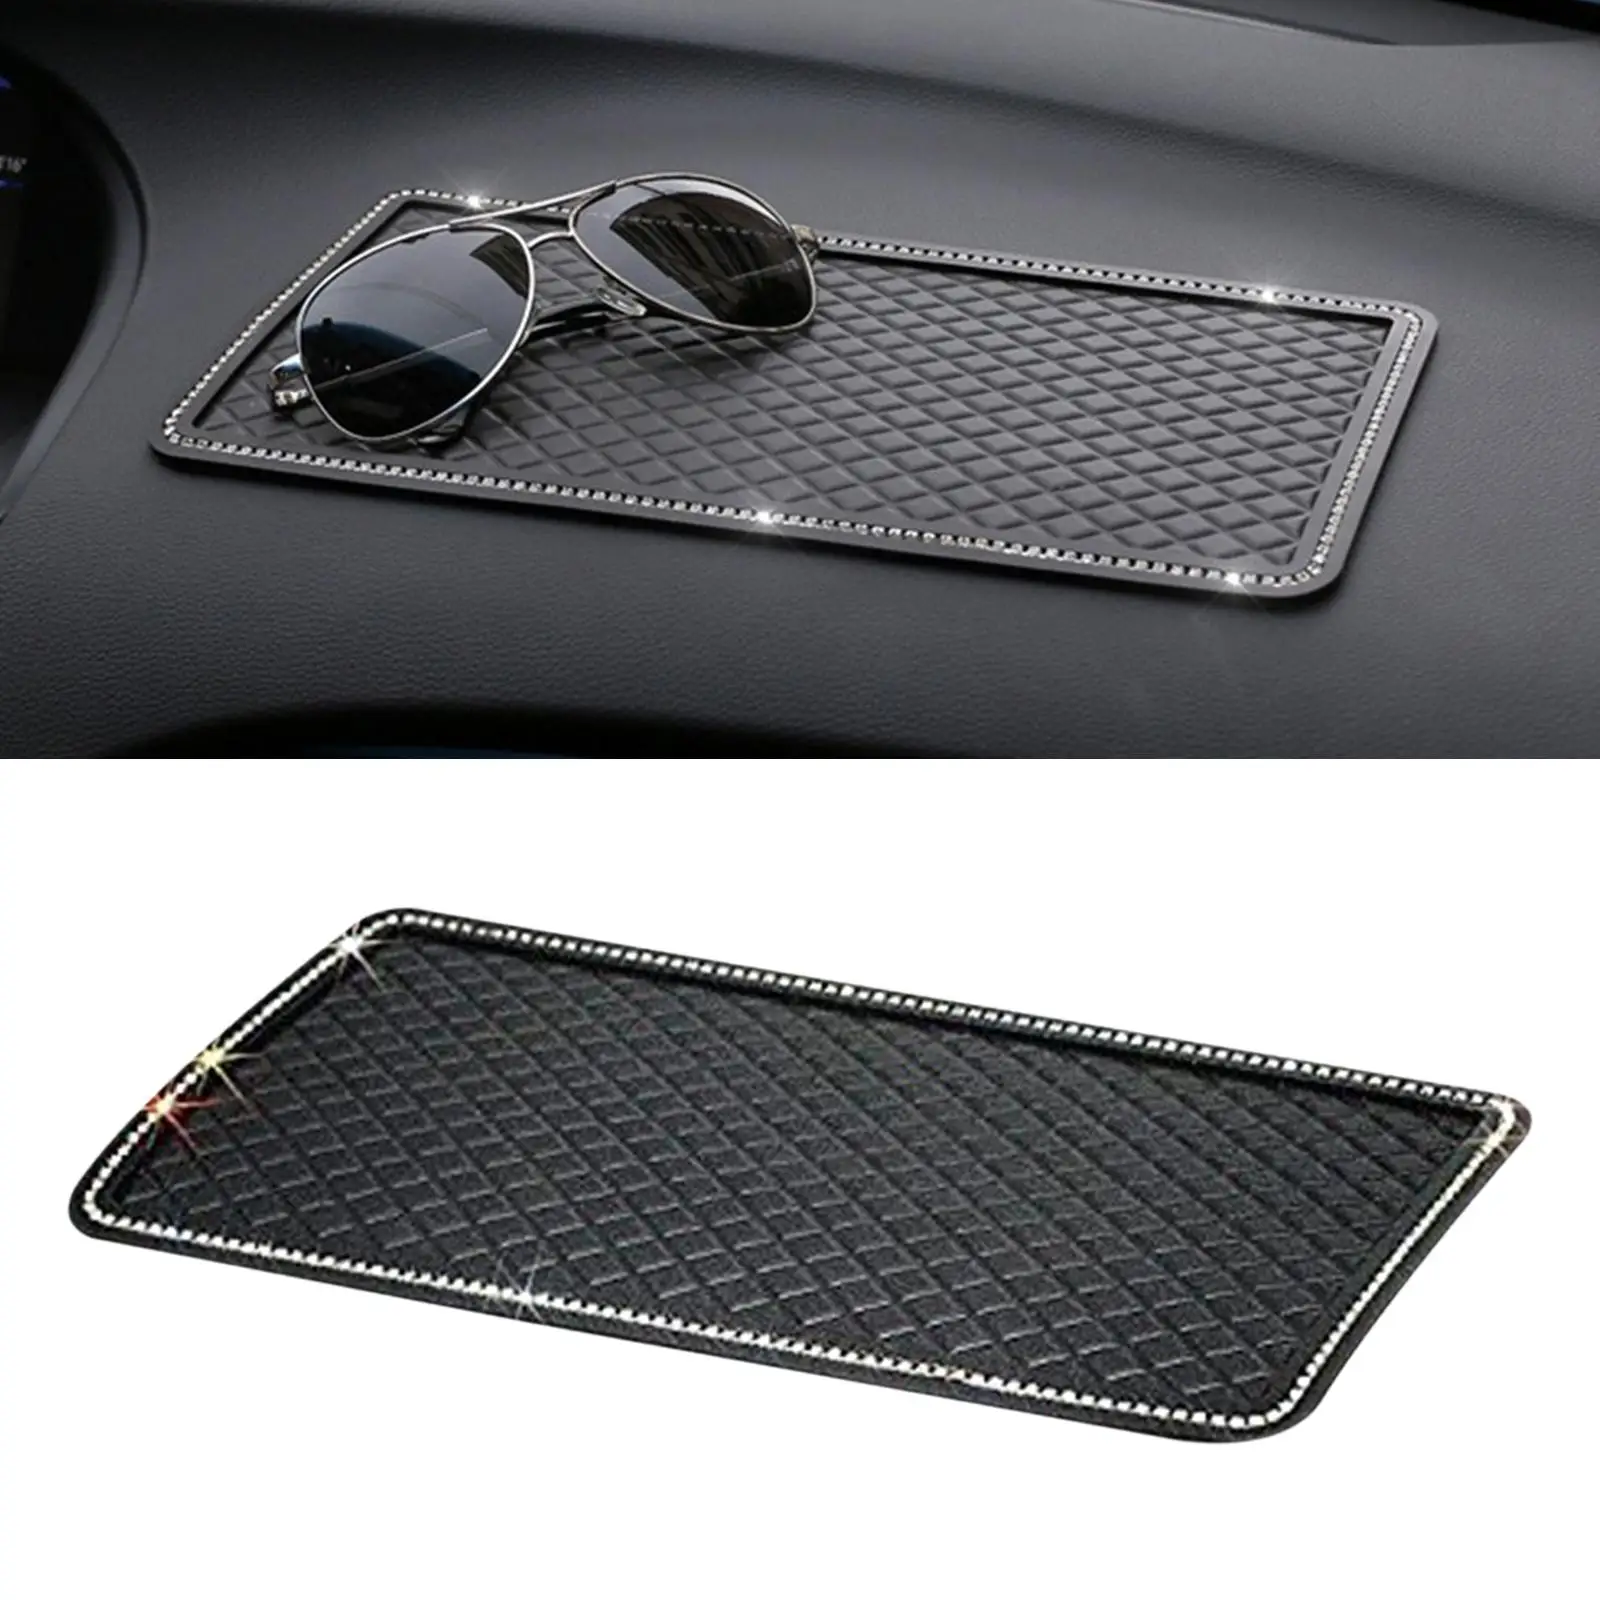 Car Anti Slip Sticky Dashboard Pad Heat Resistant Decoration for Phones